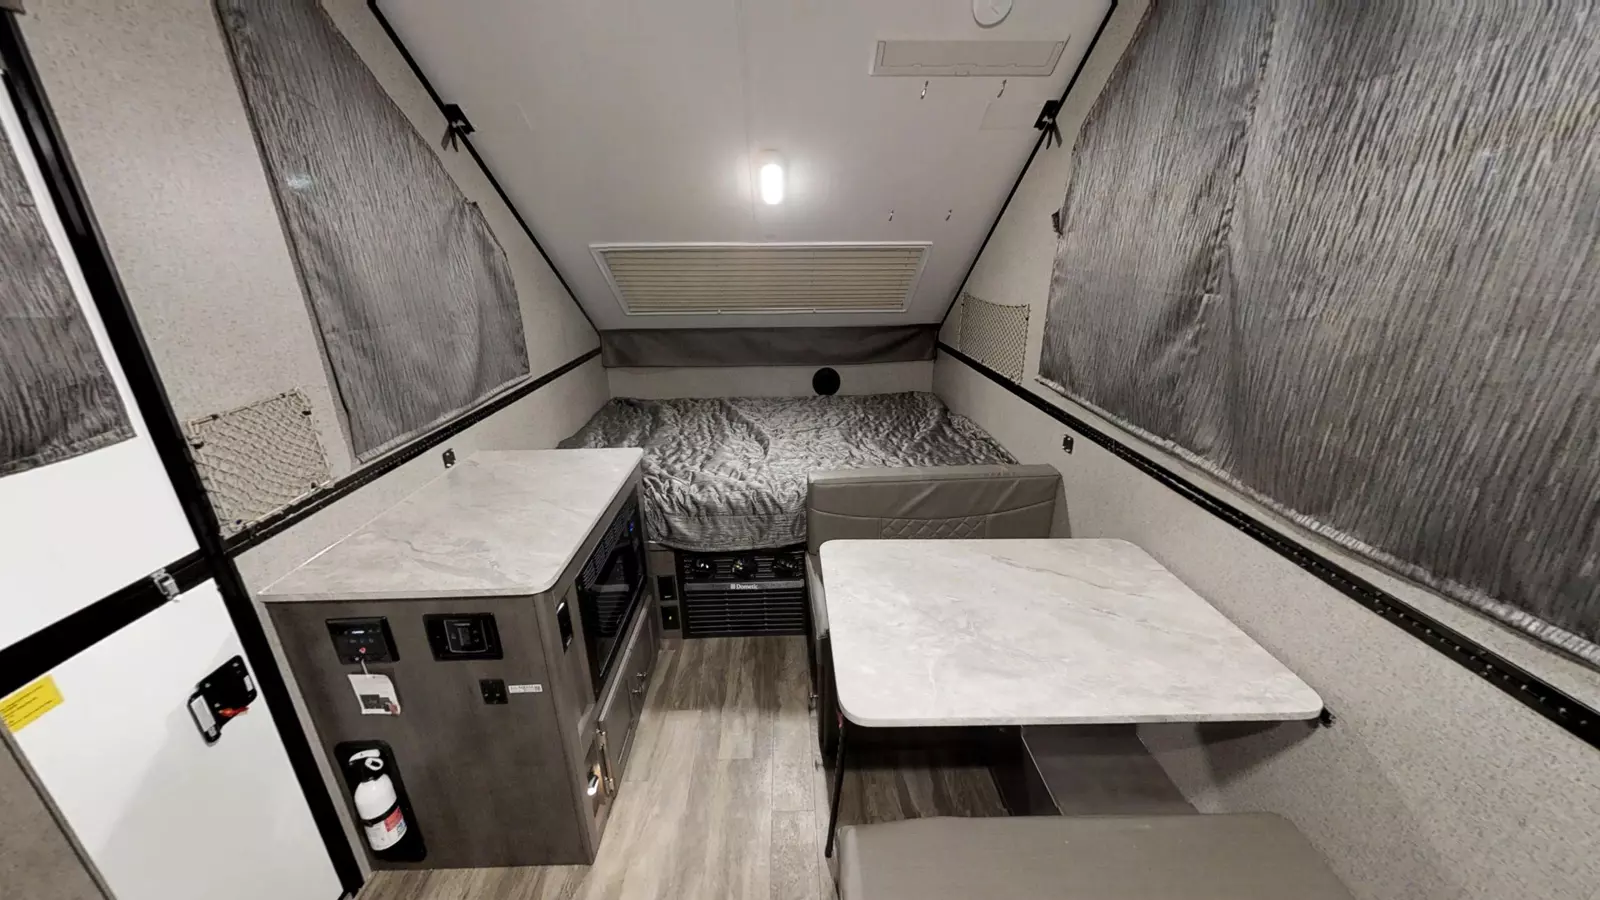 The 5 Best Pop Up Campers With Bathrooms The Simple Prepper